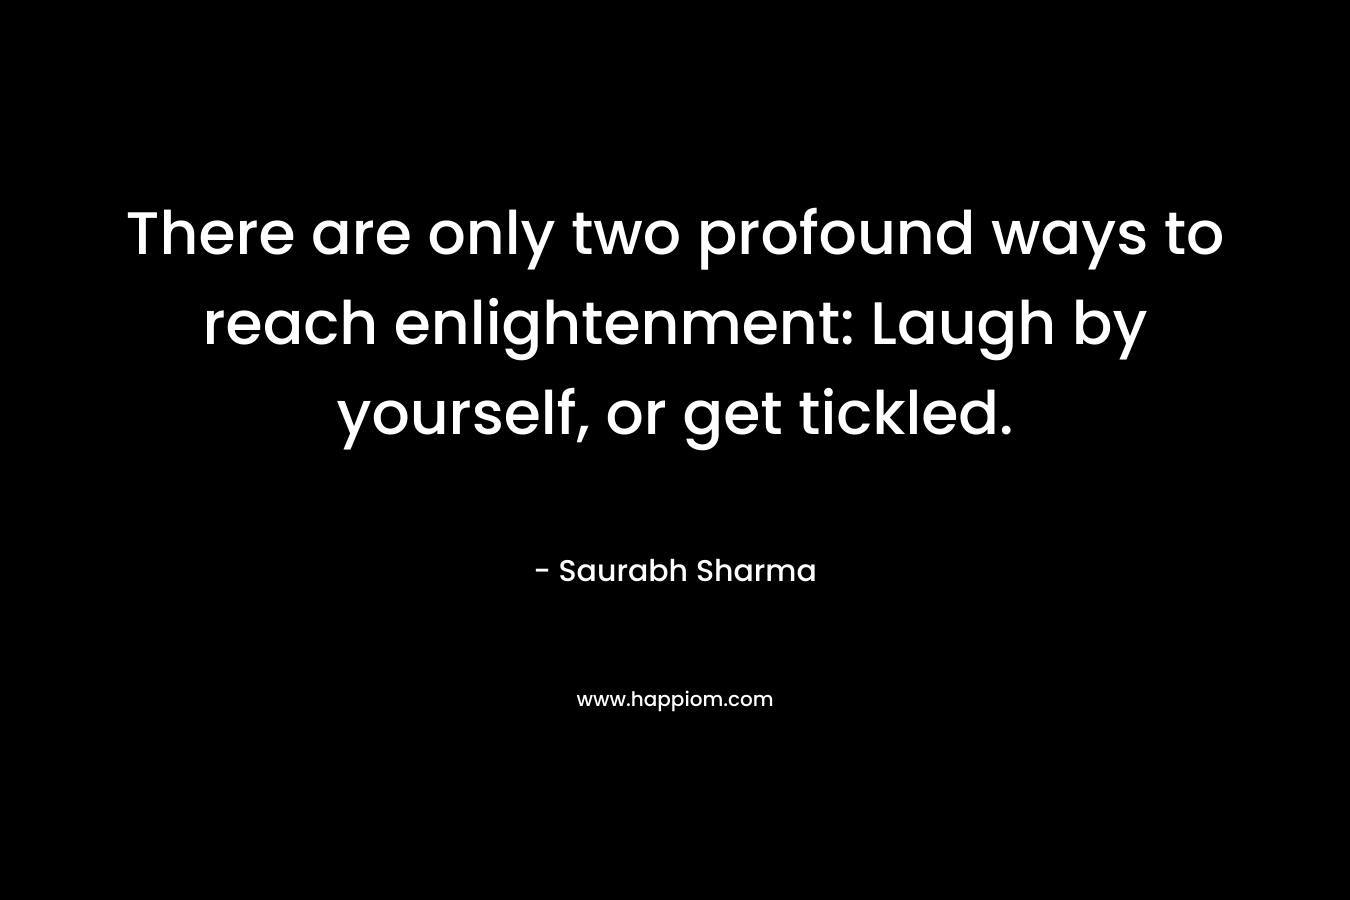 There are only two profound ways to reach enlightenment: Laugh by yourself, or get tickled. – Saurabh Sharma